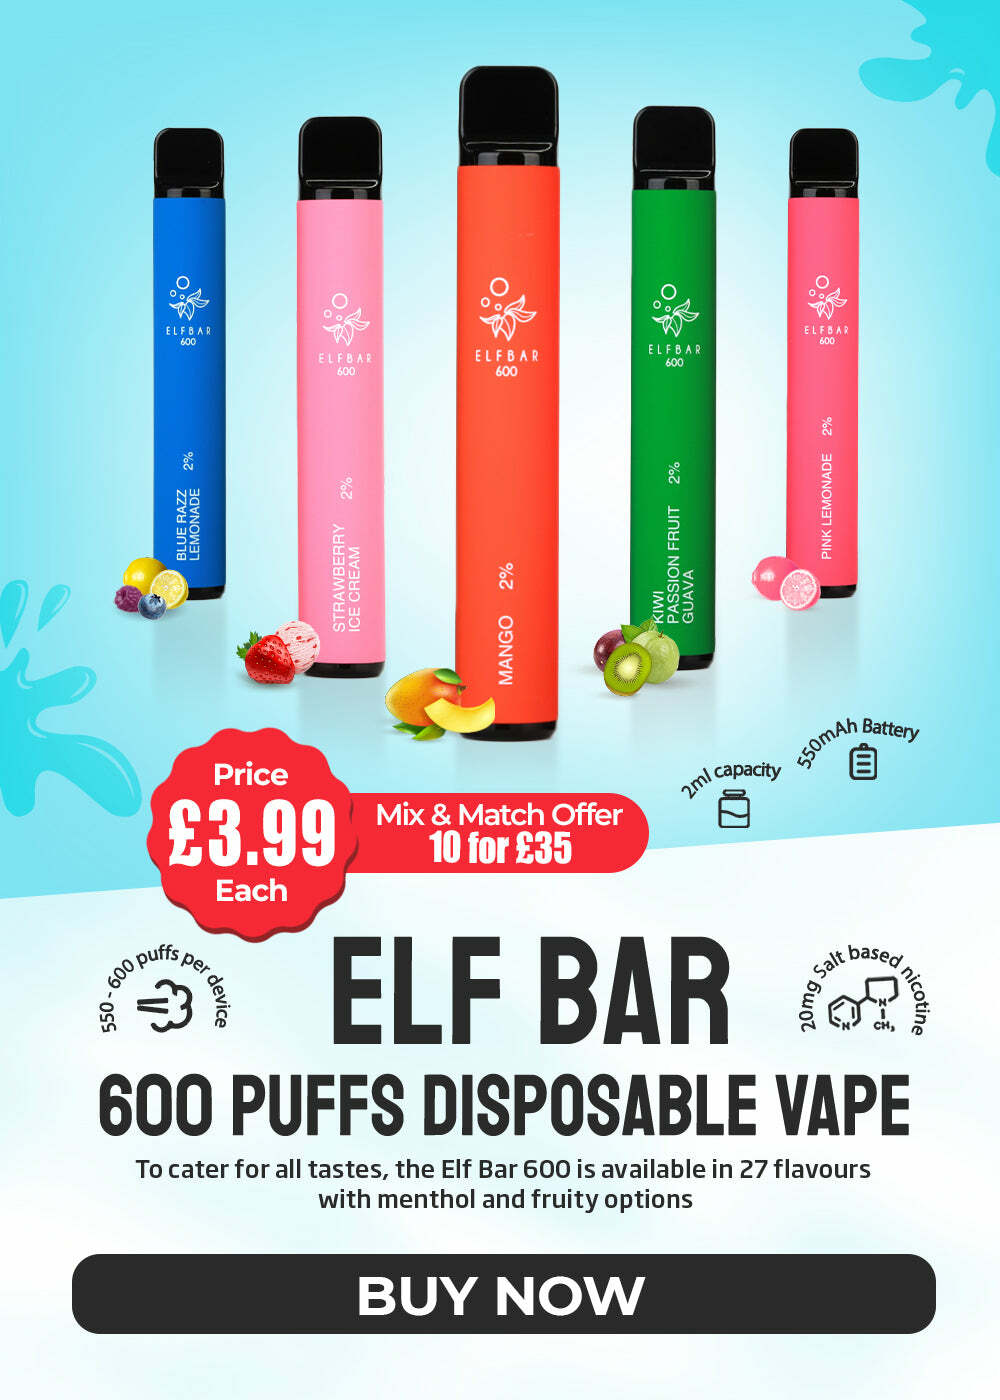  Je o Ly RS 0 5 PASSION FRUIT 2% " GUAVA MANGO 2% gy Price LSO 2.8 Mix Match Offer Q 3-9 10for 35 Each "um puffs be, base,, F e s BTI 8 2 600 PUFFS DISPOSABLE VAPE To cater for all tastes, the EIf Bar 600 is available in 27 flavours with menthol and fruity options BUY NOW 